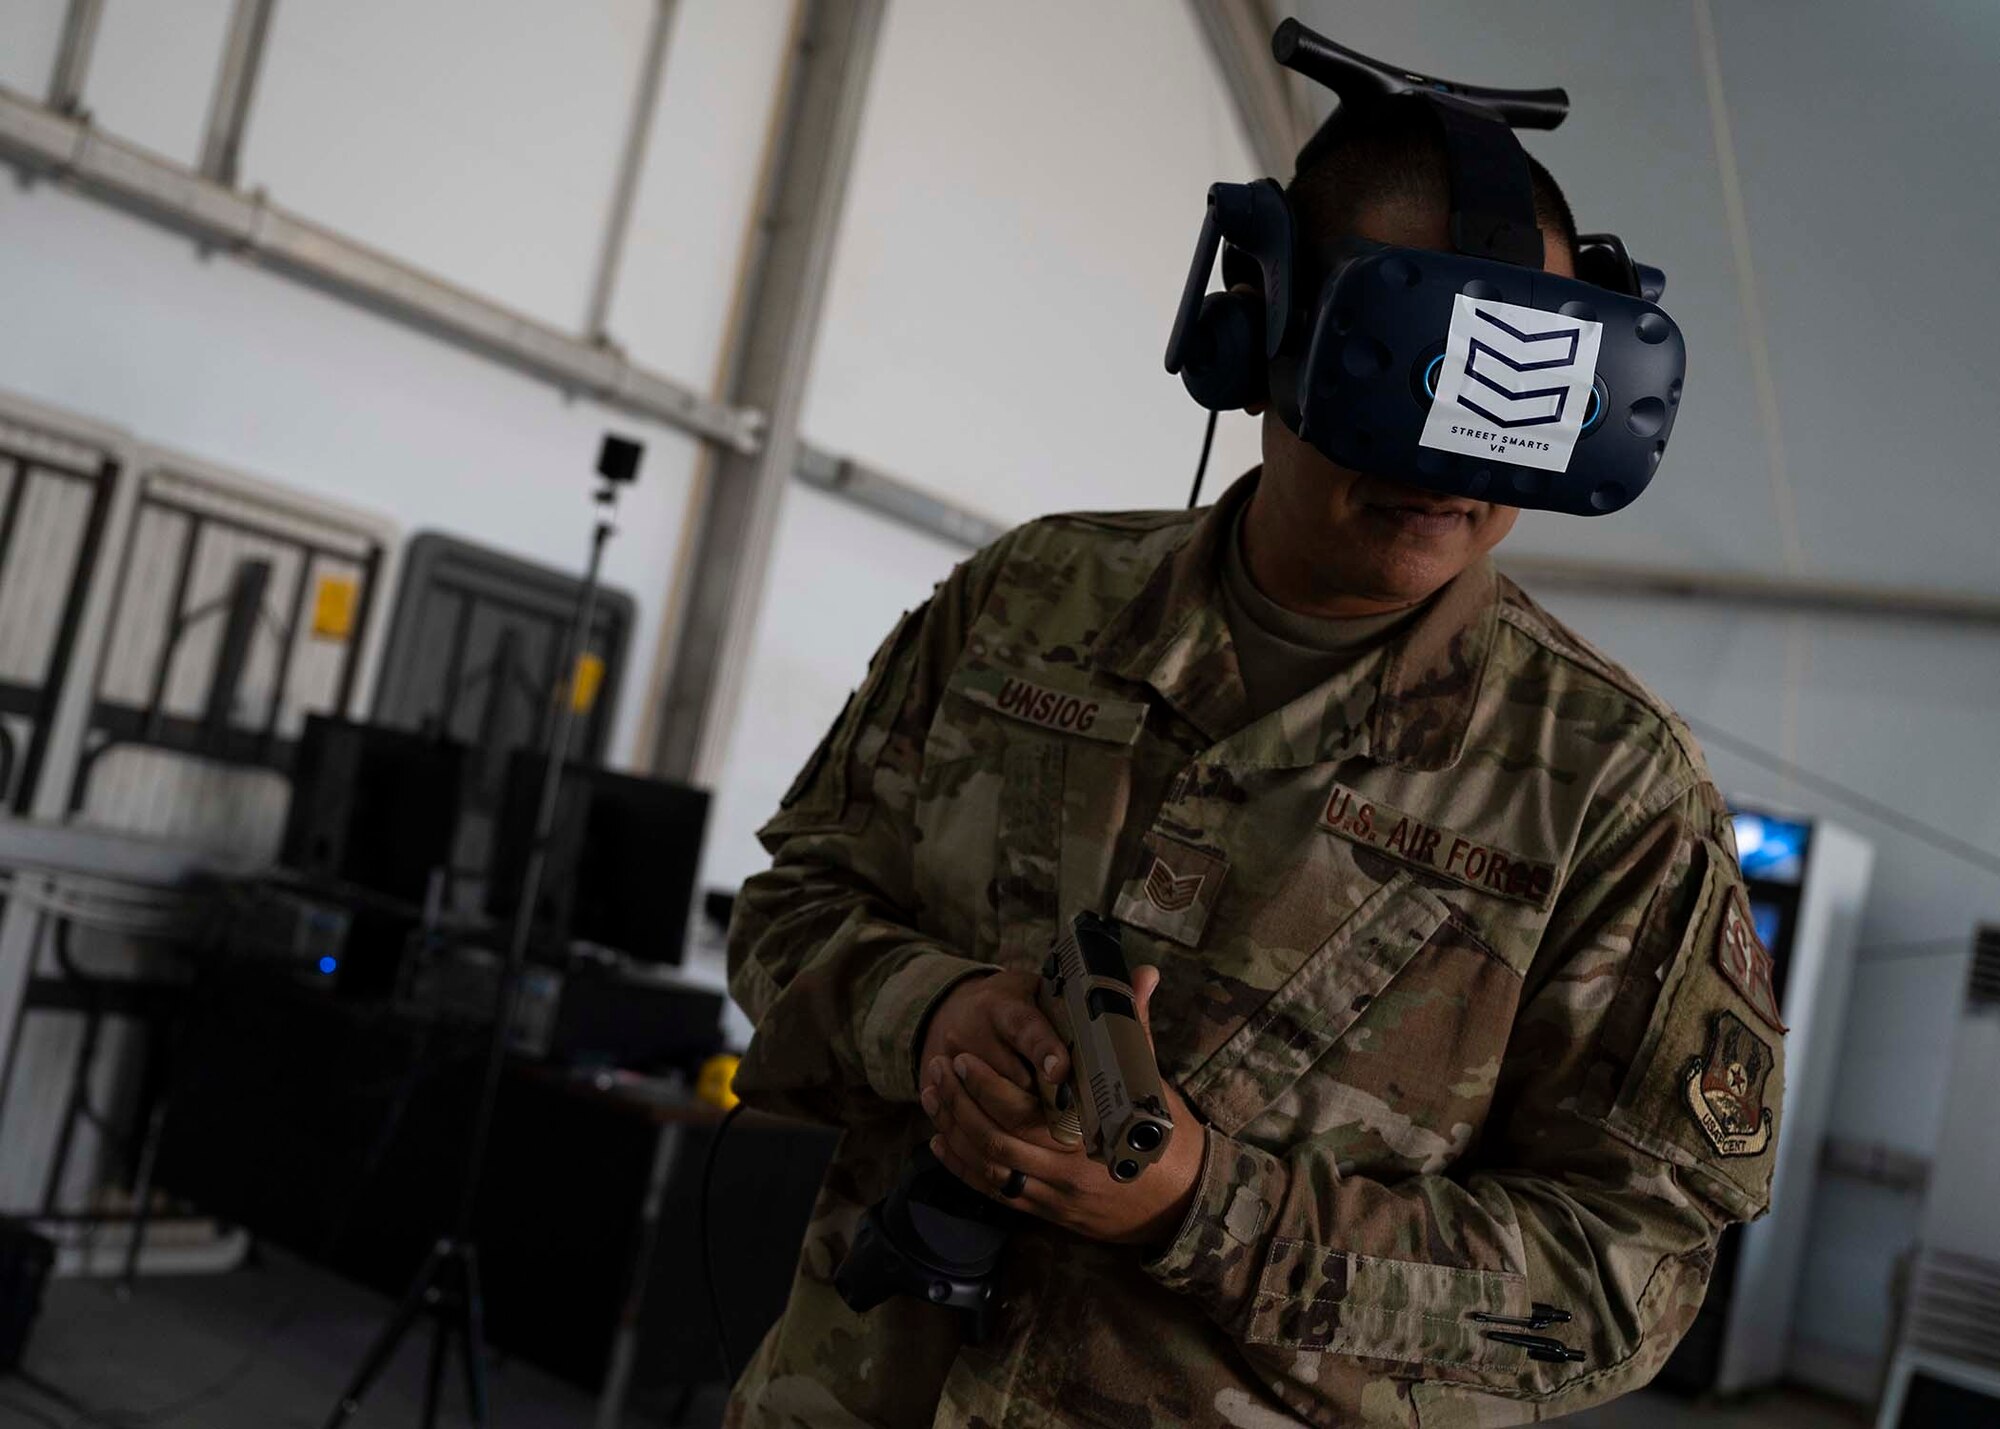 U.S. Air Force Tech. Sgt. Frank Unsioug, 380th Expeditionary Security Forces Squadron combat arms instructor, uses a virtual reality (VR) system in a simulated response at Al Dhafra Air Base, United Arab Emirates, Jan. 20, 2020.